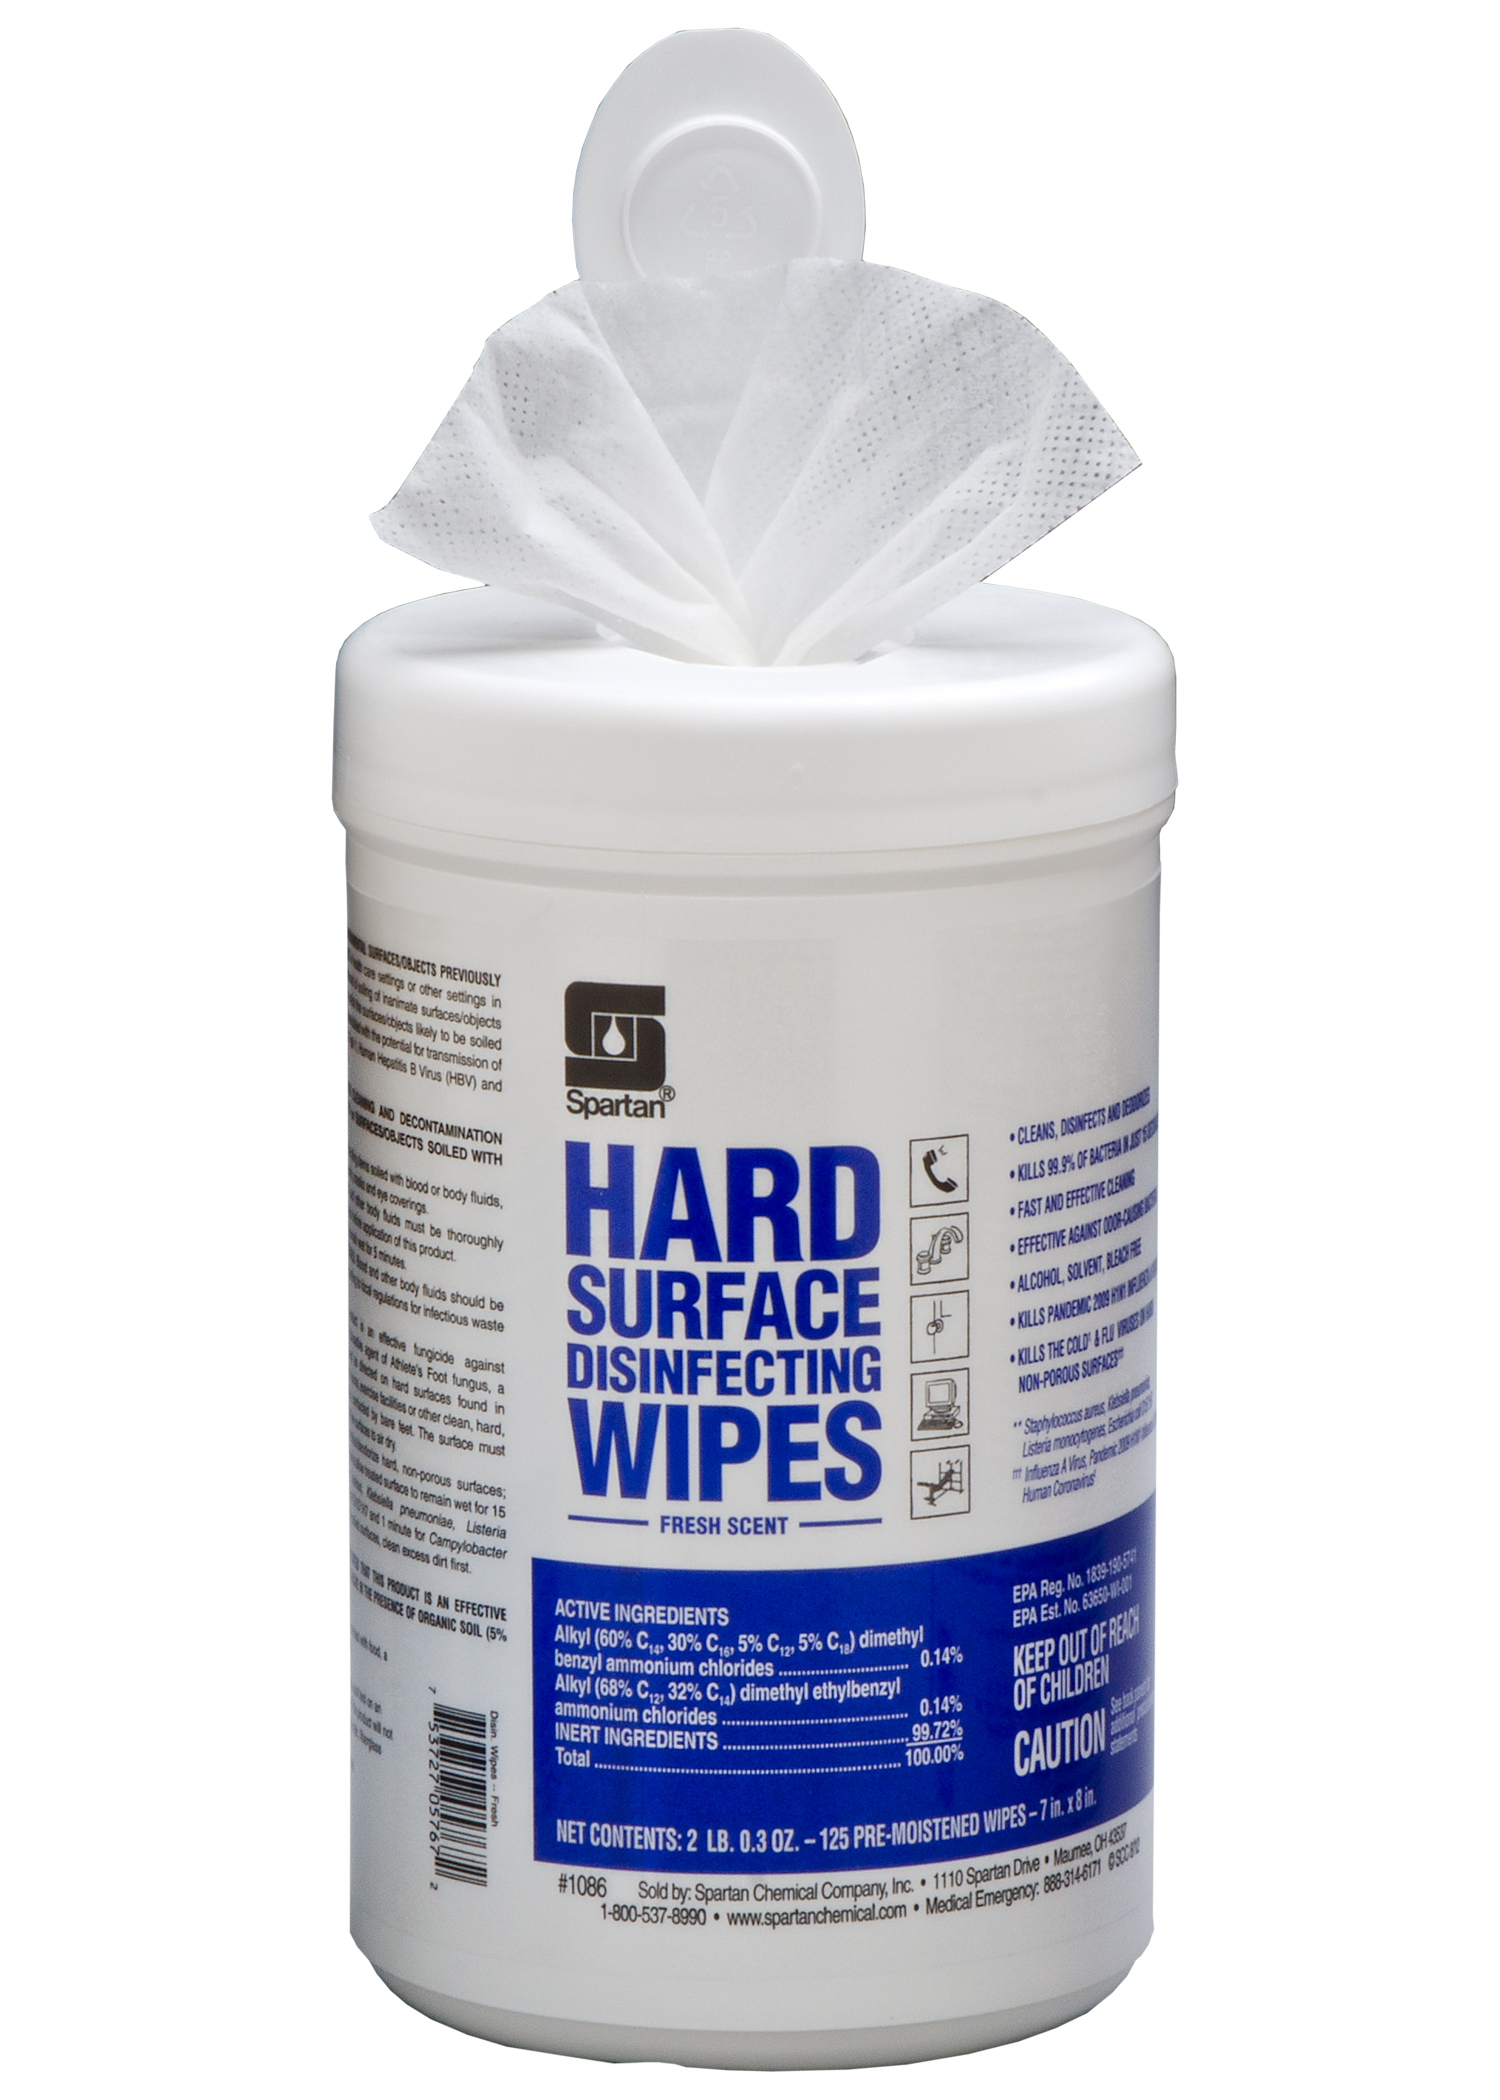 Hard Surface Disinfecting Wipes (Fresh Scent) 125 wipes (6 per case)